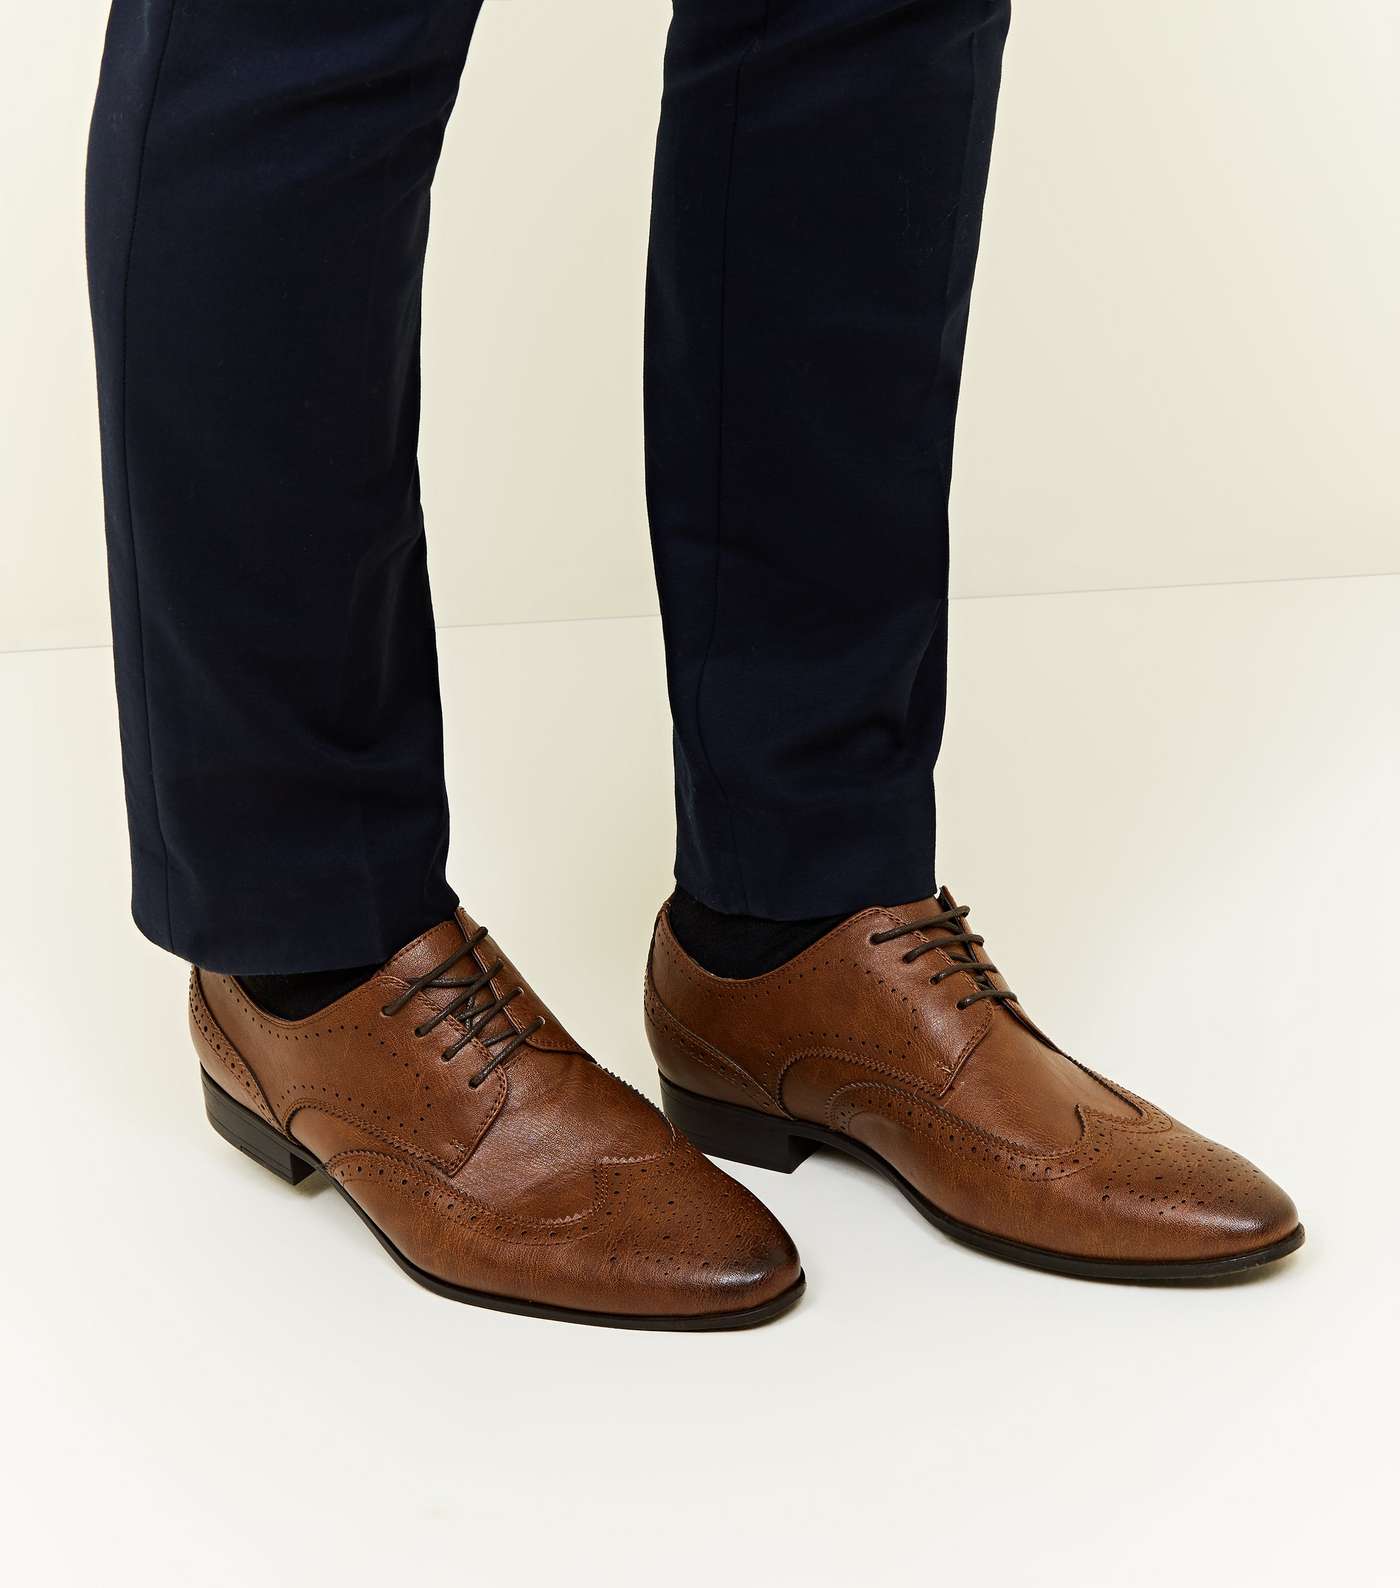 Tan Perforated Lace Up Brogues